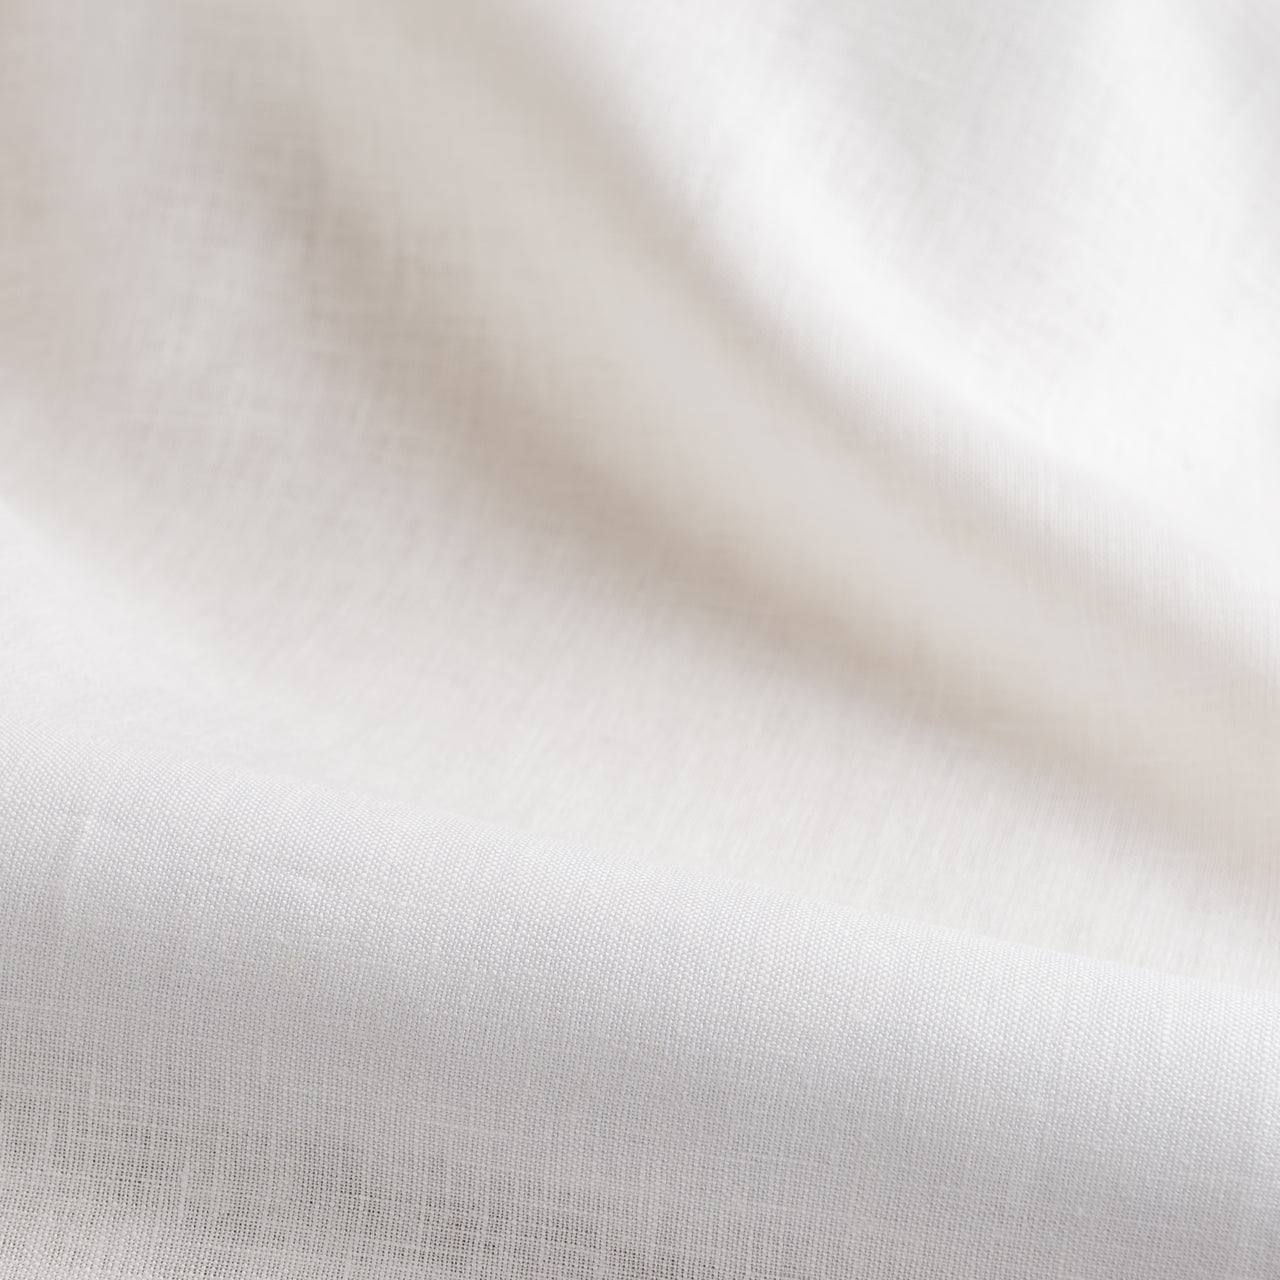 Off-White Medium Weight Linen Fabric by the Yard - 100% French Natural - Width 52”- 106”